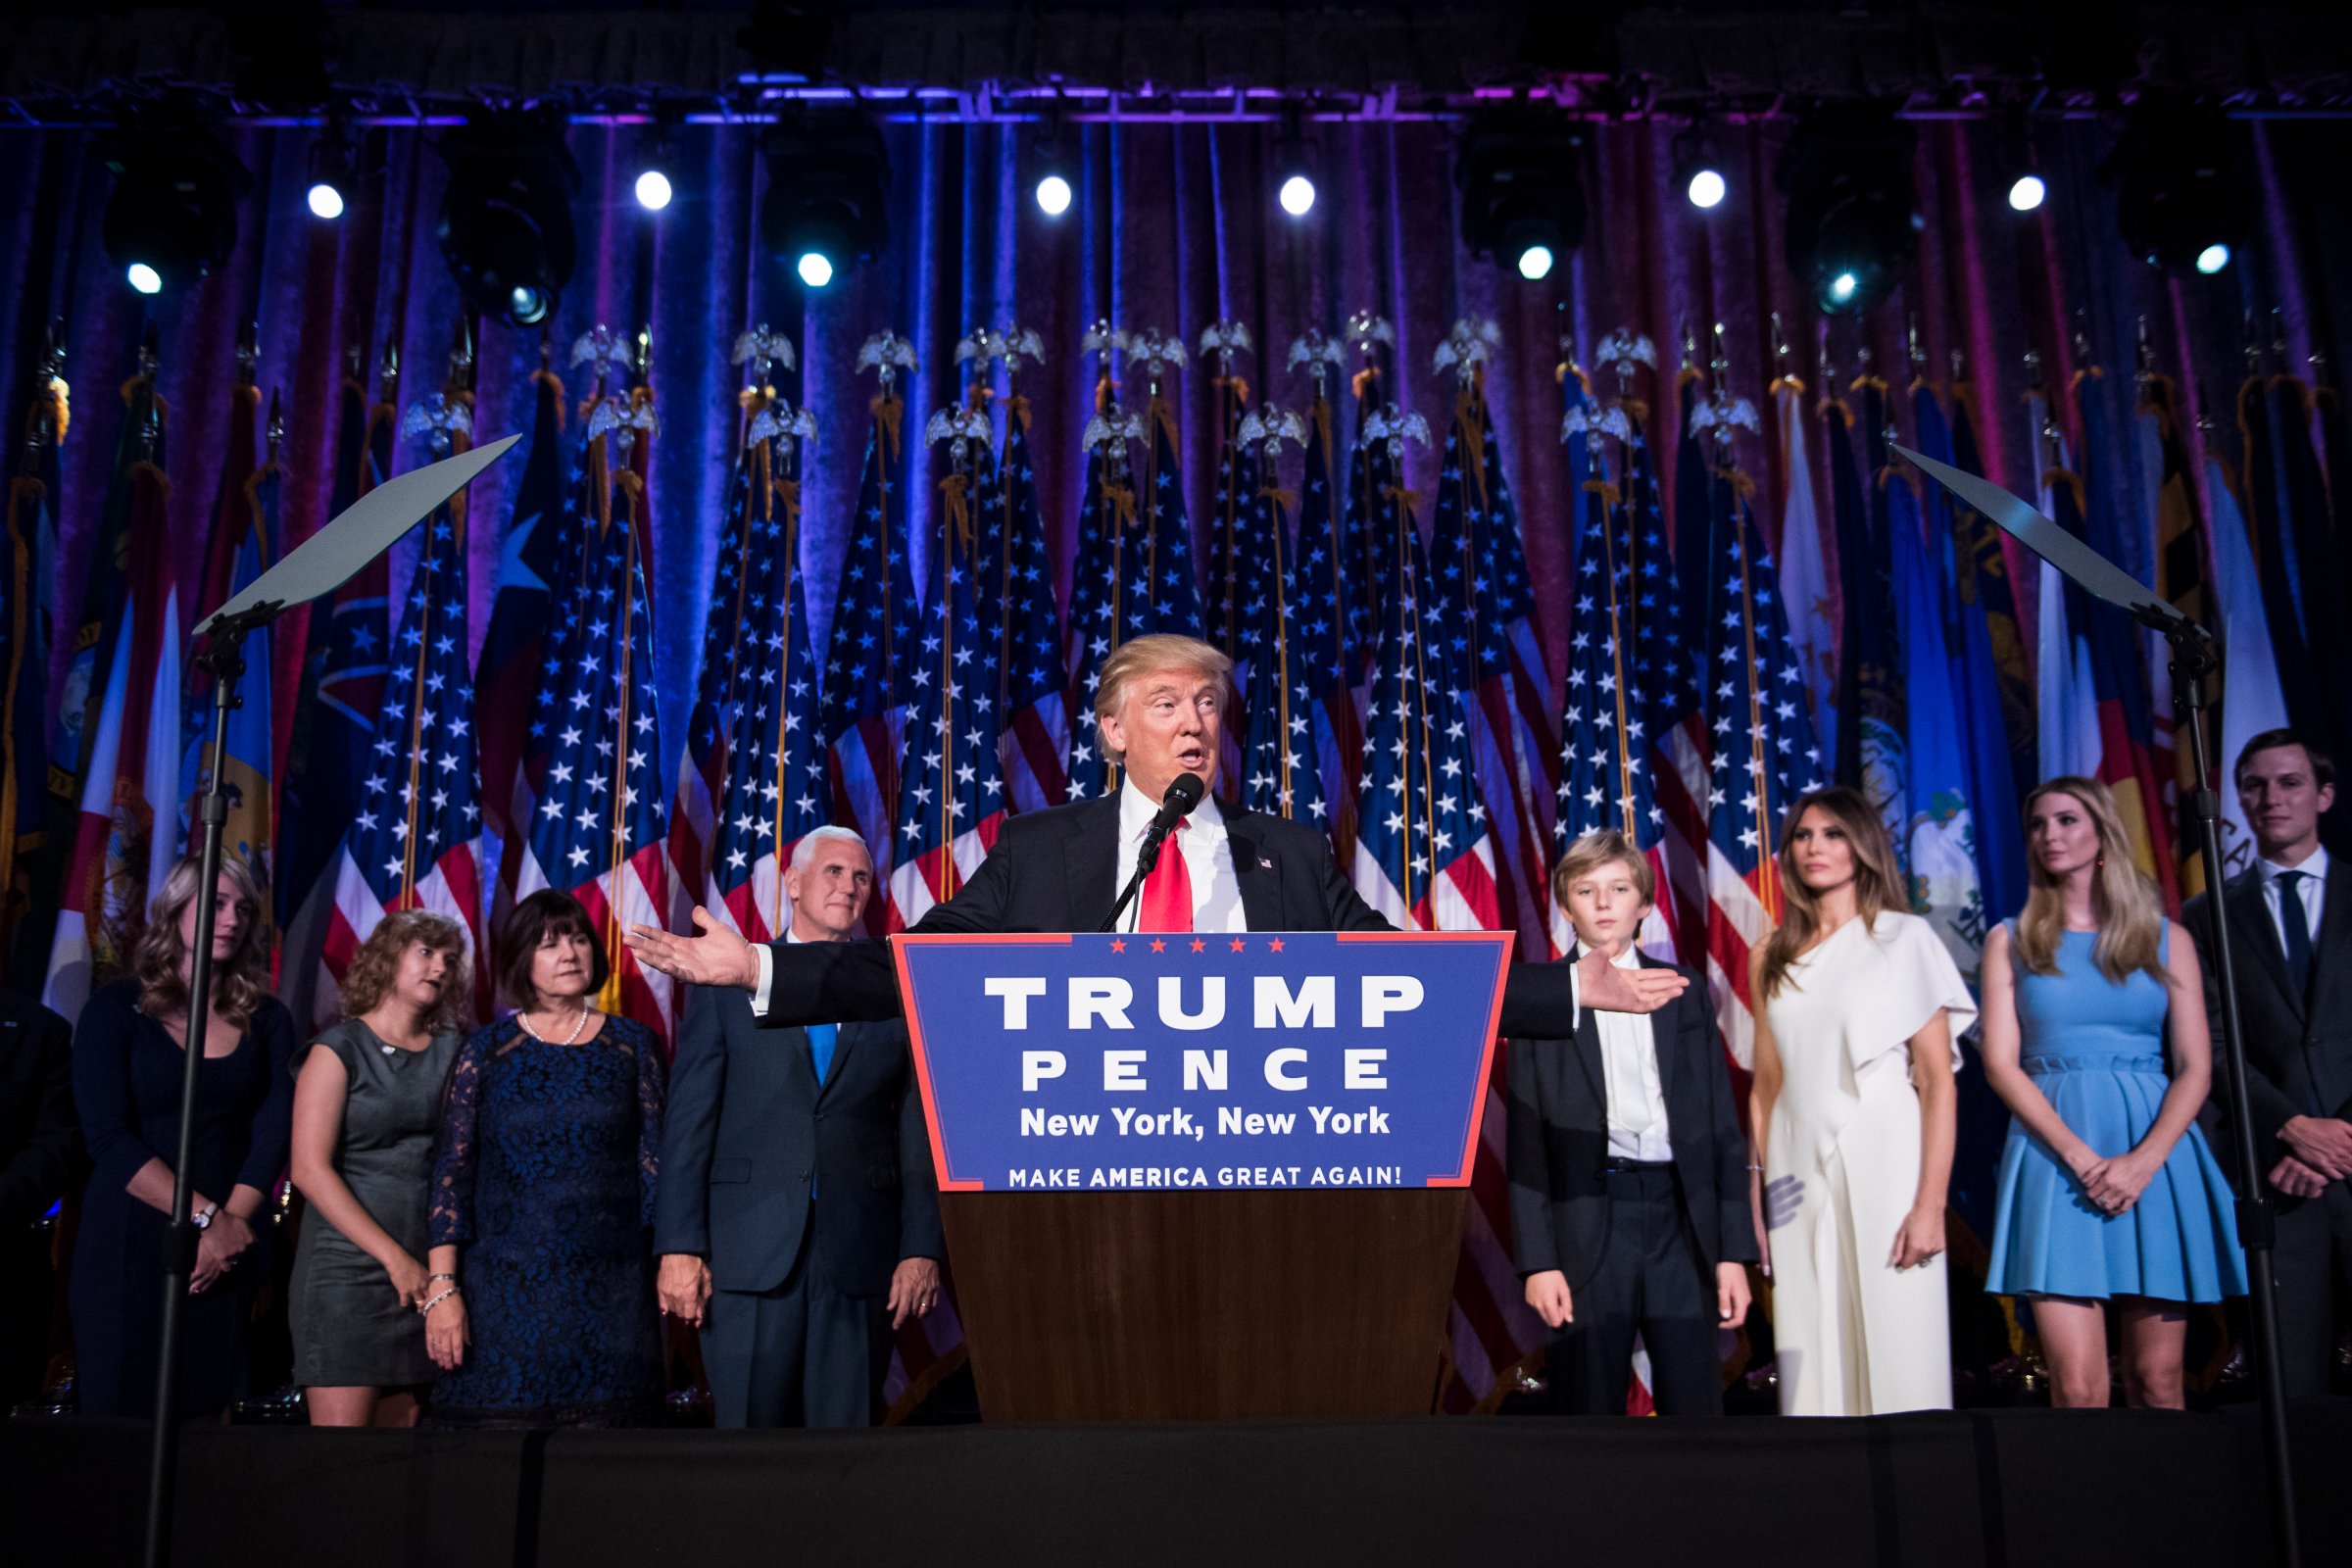 Republican presidential candidate Donald Trump wins in New York NY